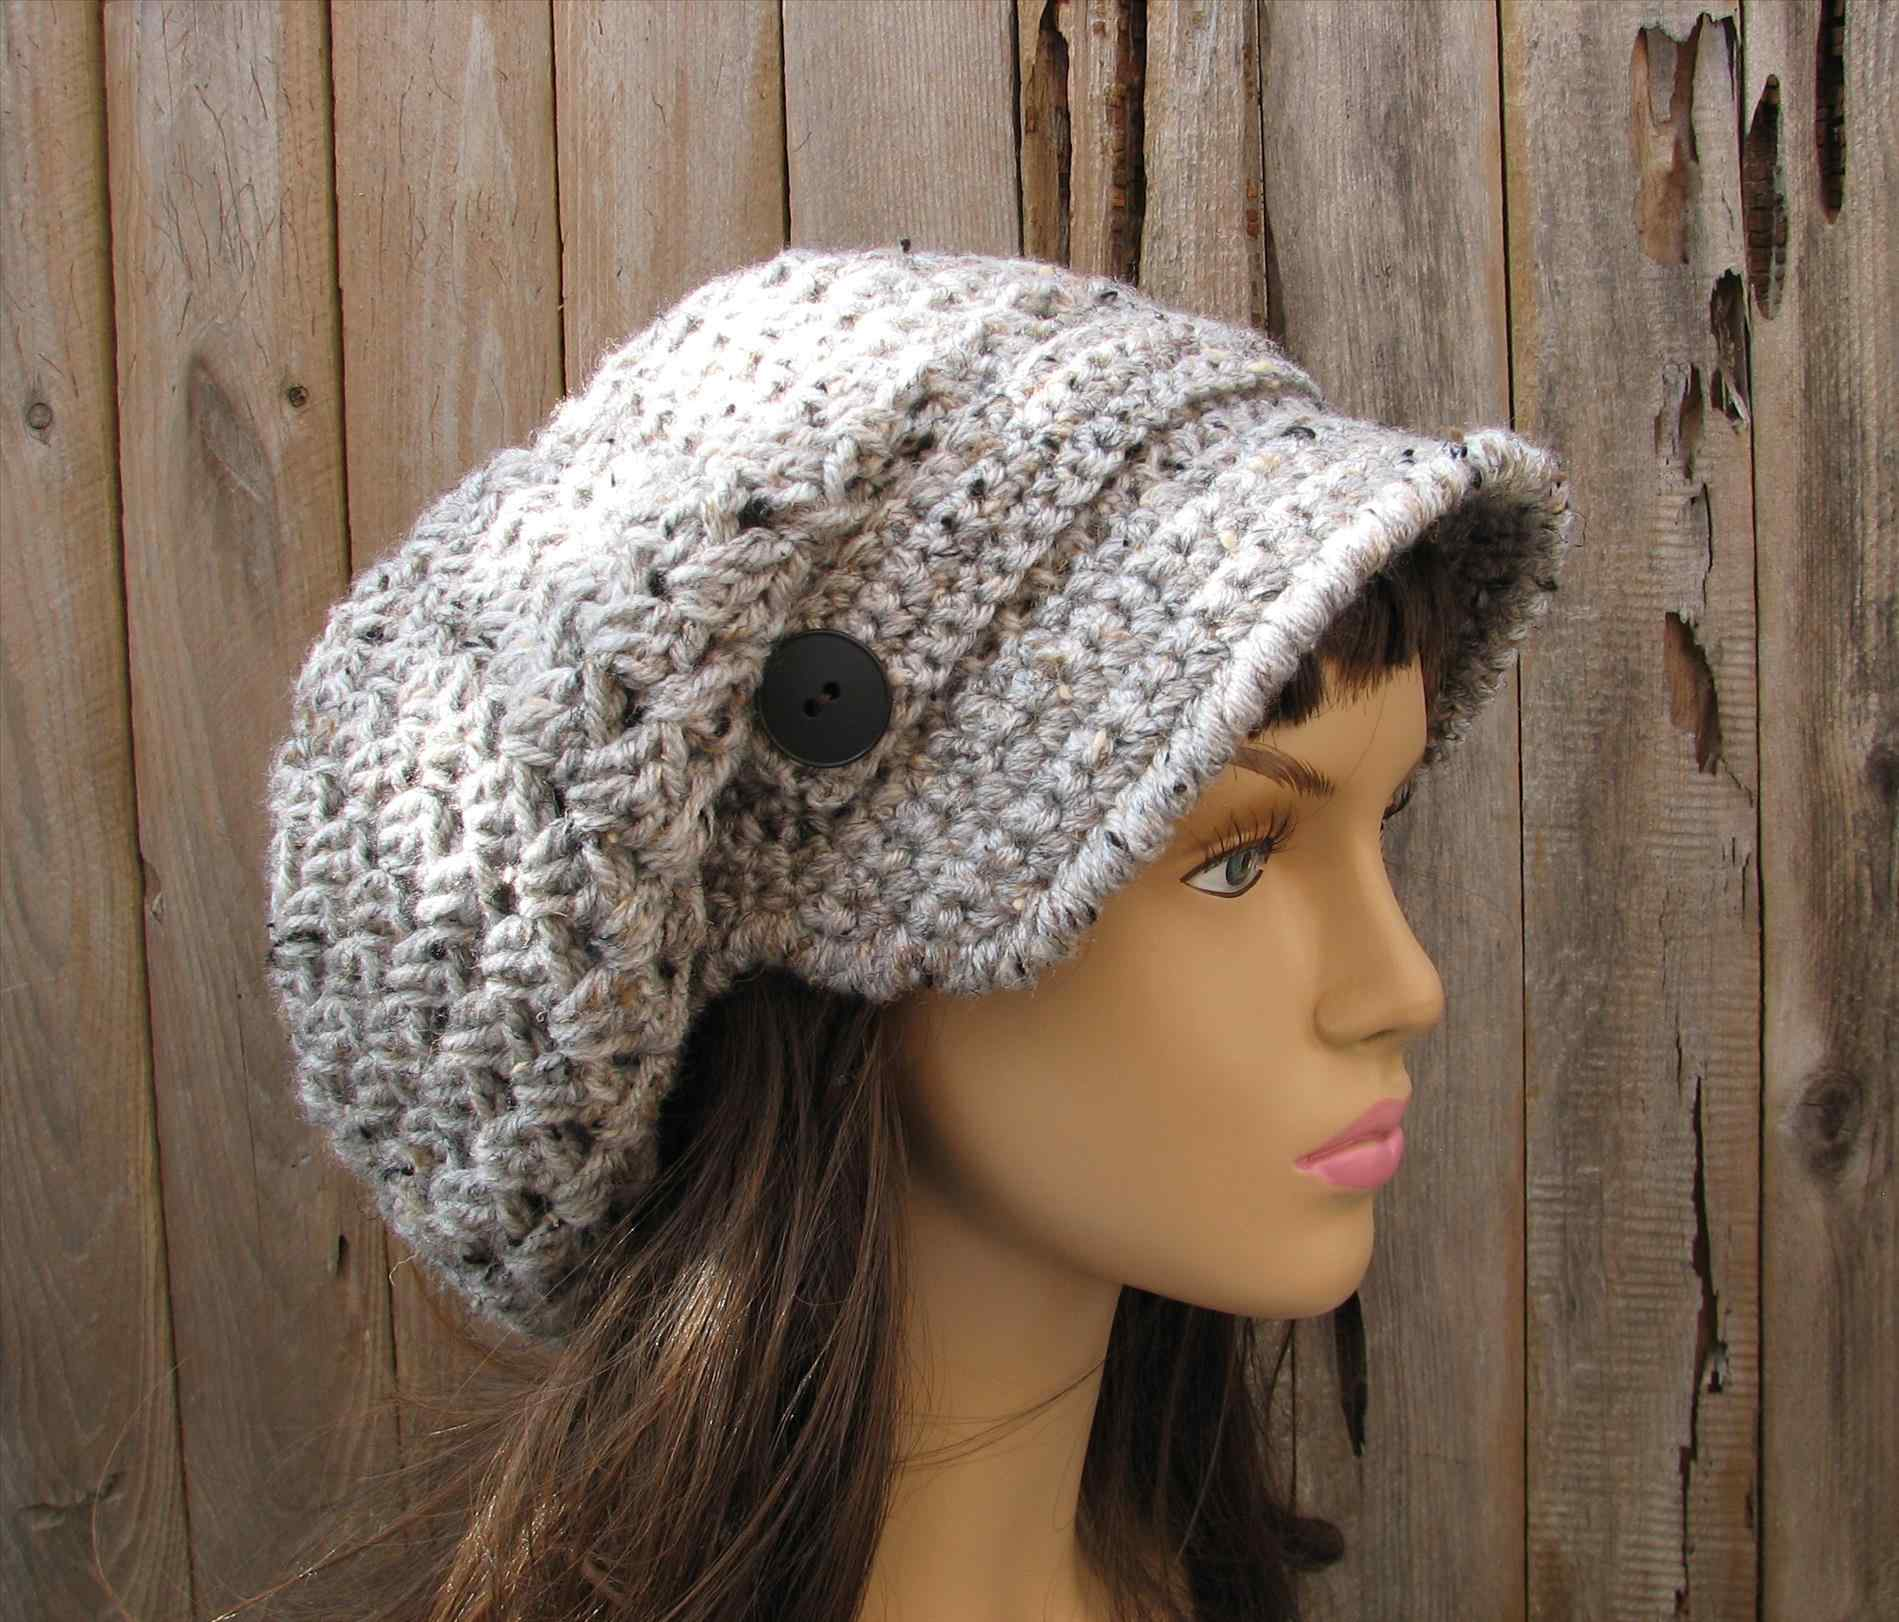 Crochet Slouchy Hat With Brim Pattern Slouchy Hat With Brim Pattern Knit Look Rhtherapycom Newsboy